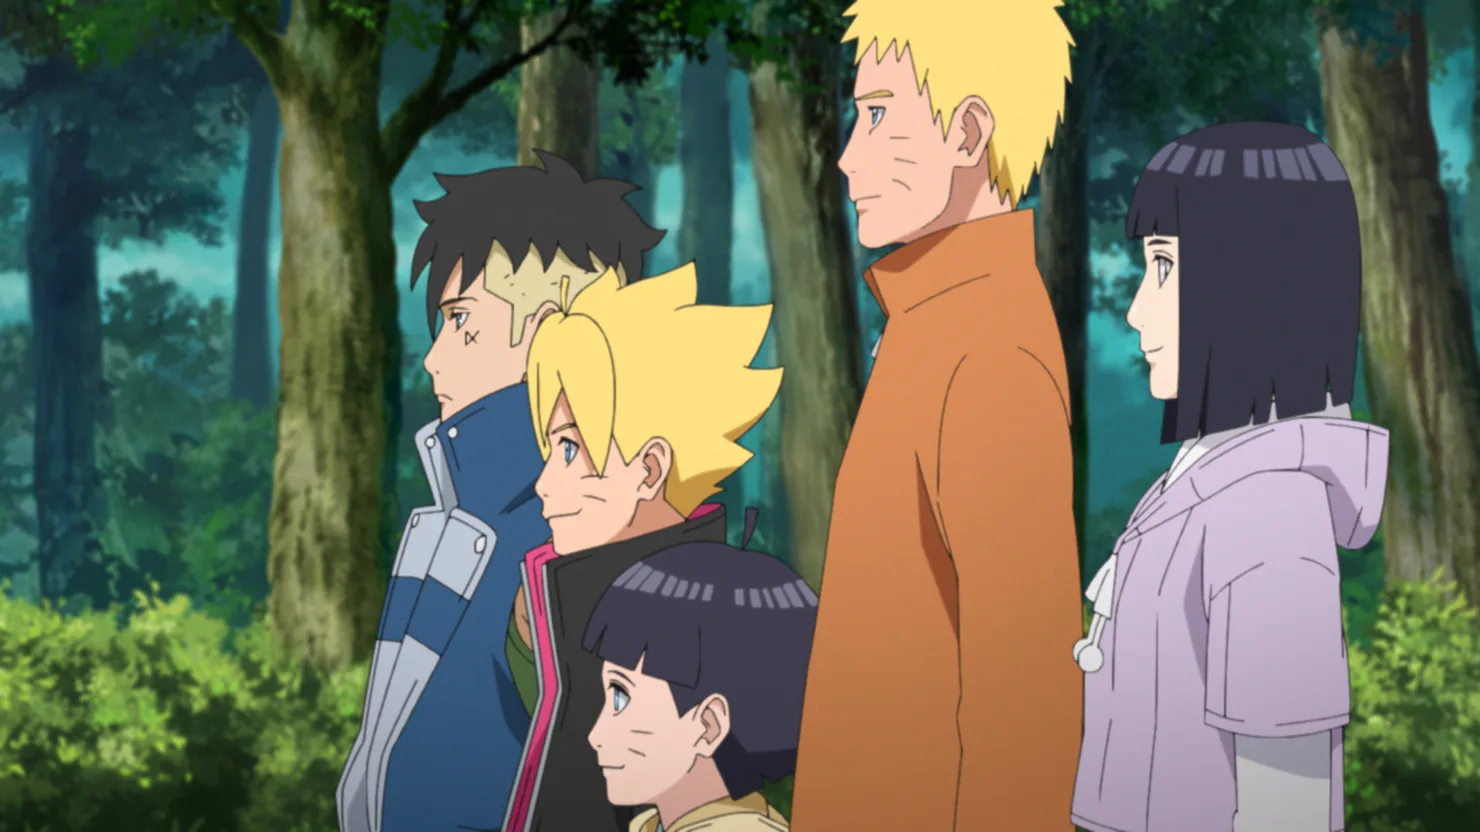 Naruto tells the story of the young warrior Naruto Uzumaki, who hopes to gain the respect of his friends and the town's Hokage. 